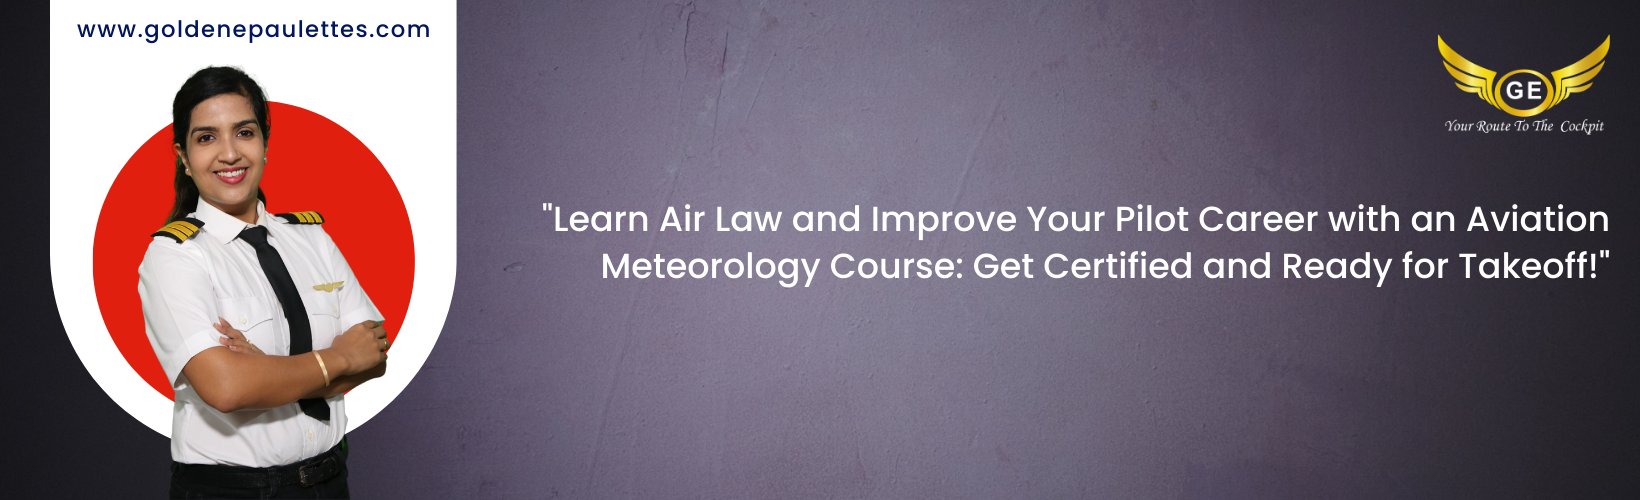 What You Need to Know About Air Navigation Course in Airline Transport Pilot License